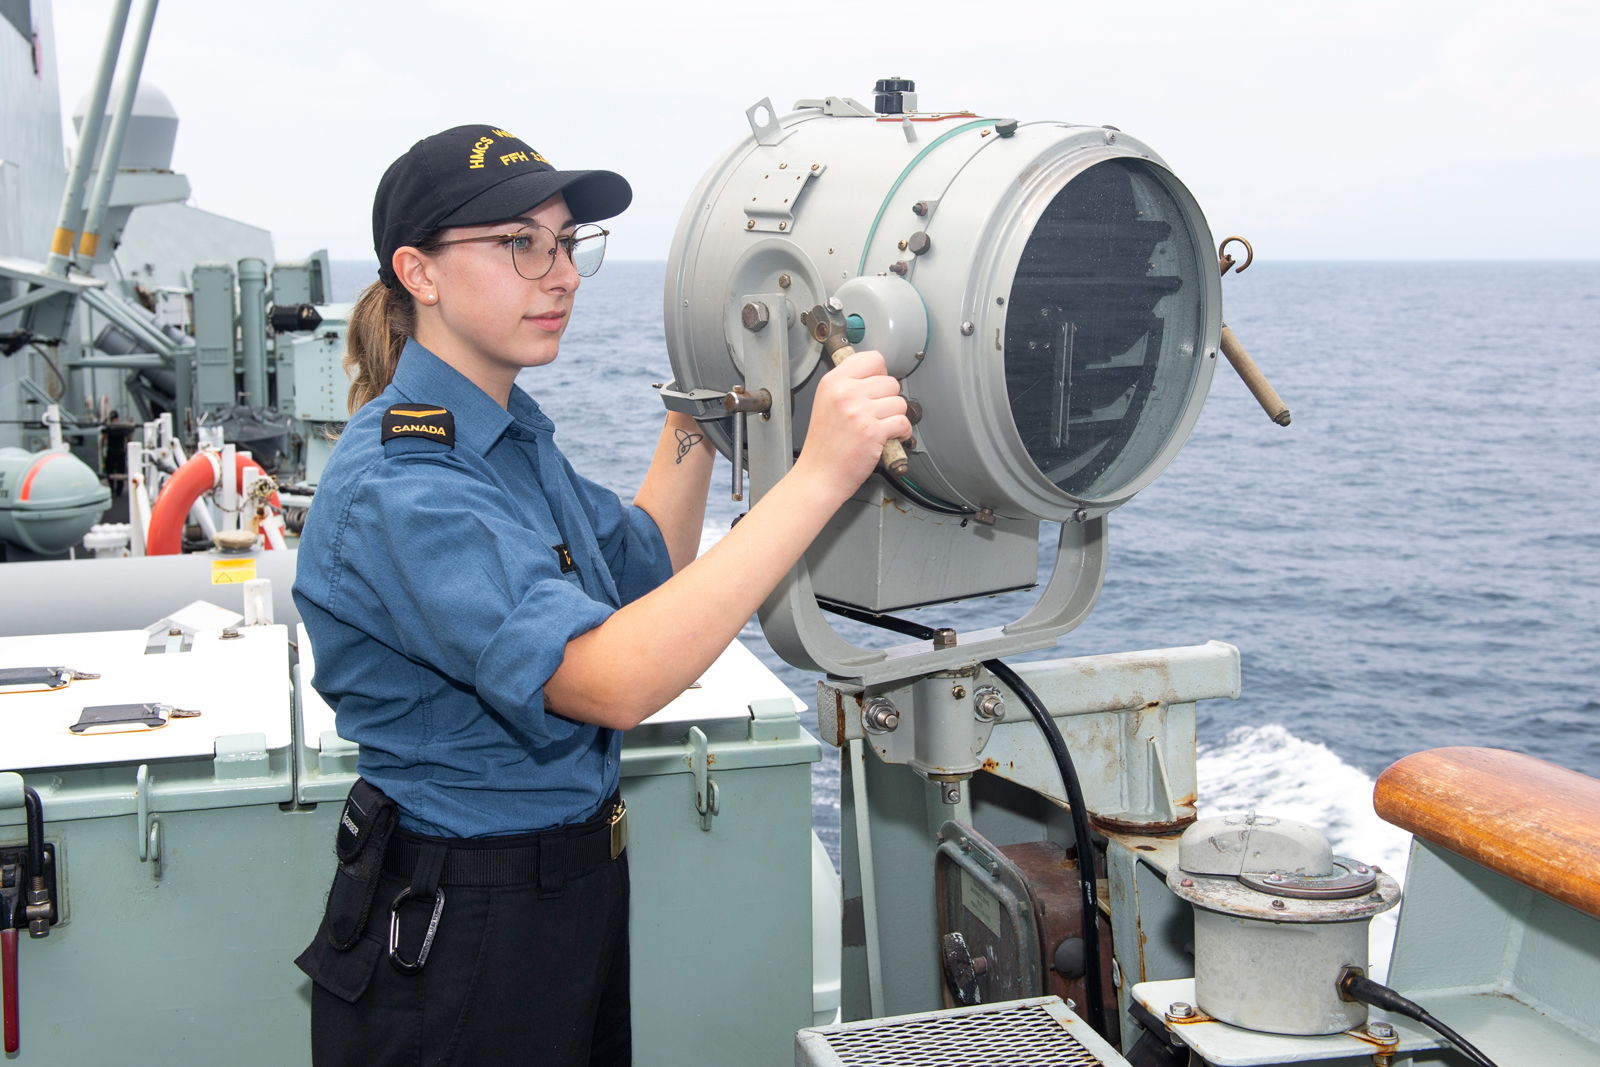 Sailor First Class Hunter Johnson on board HMCS Winnipeg in the East China Sea during Operation Neon. Photo by MCpl Andre Maillet, MARPAC Imaging Services